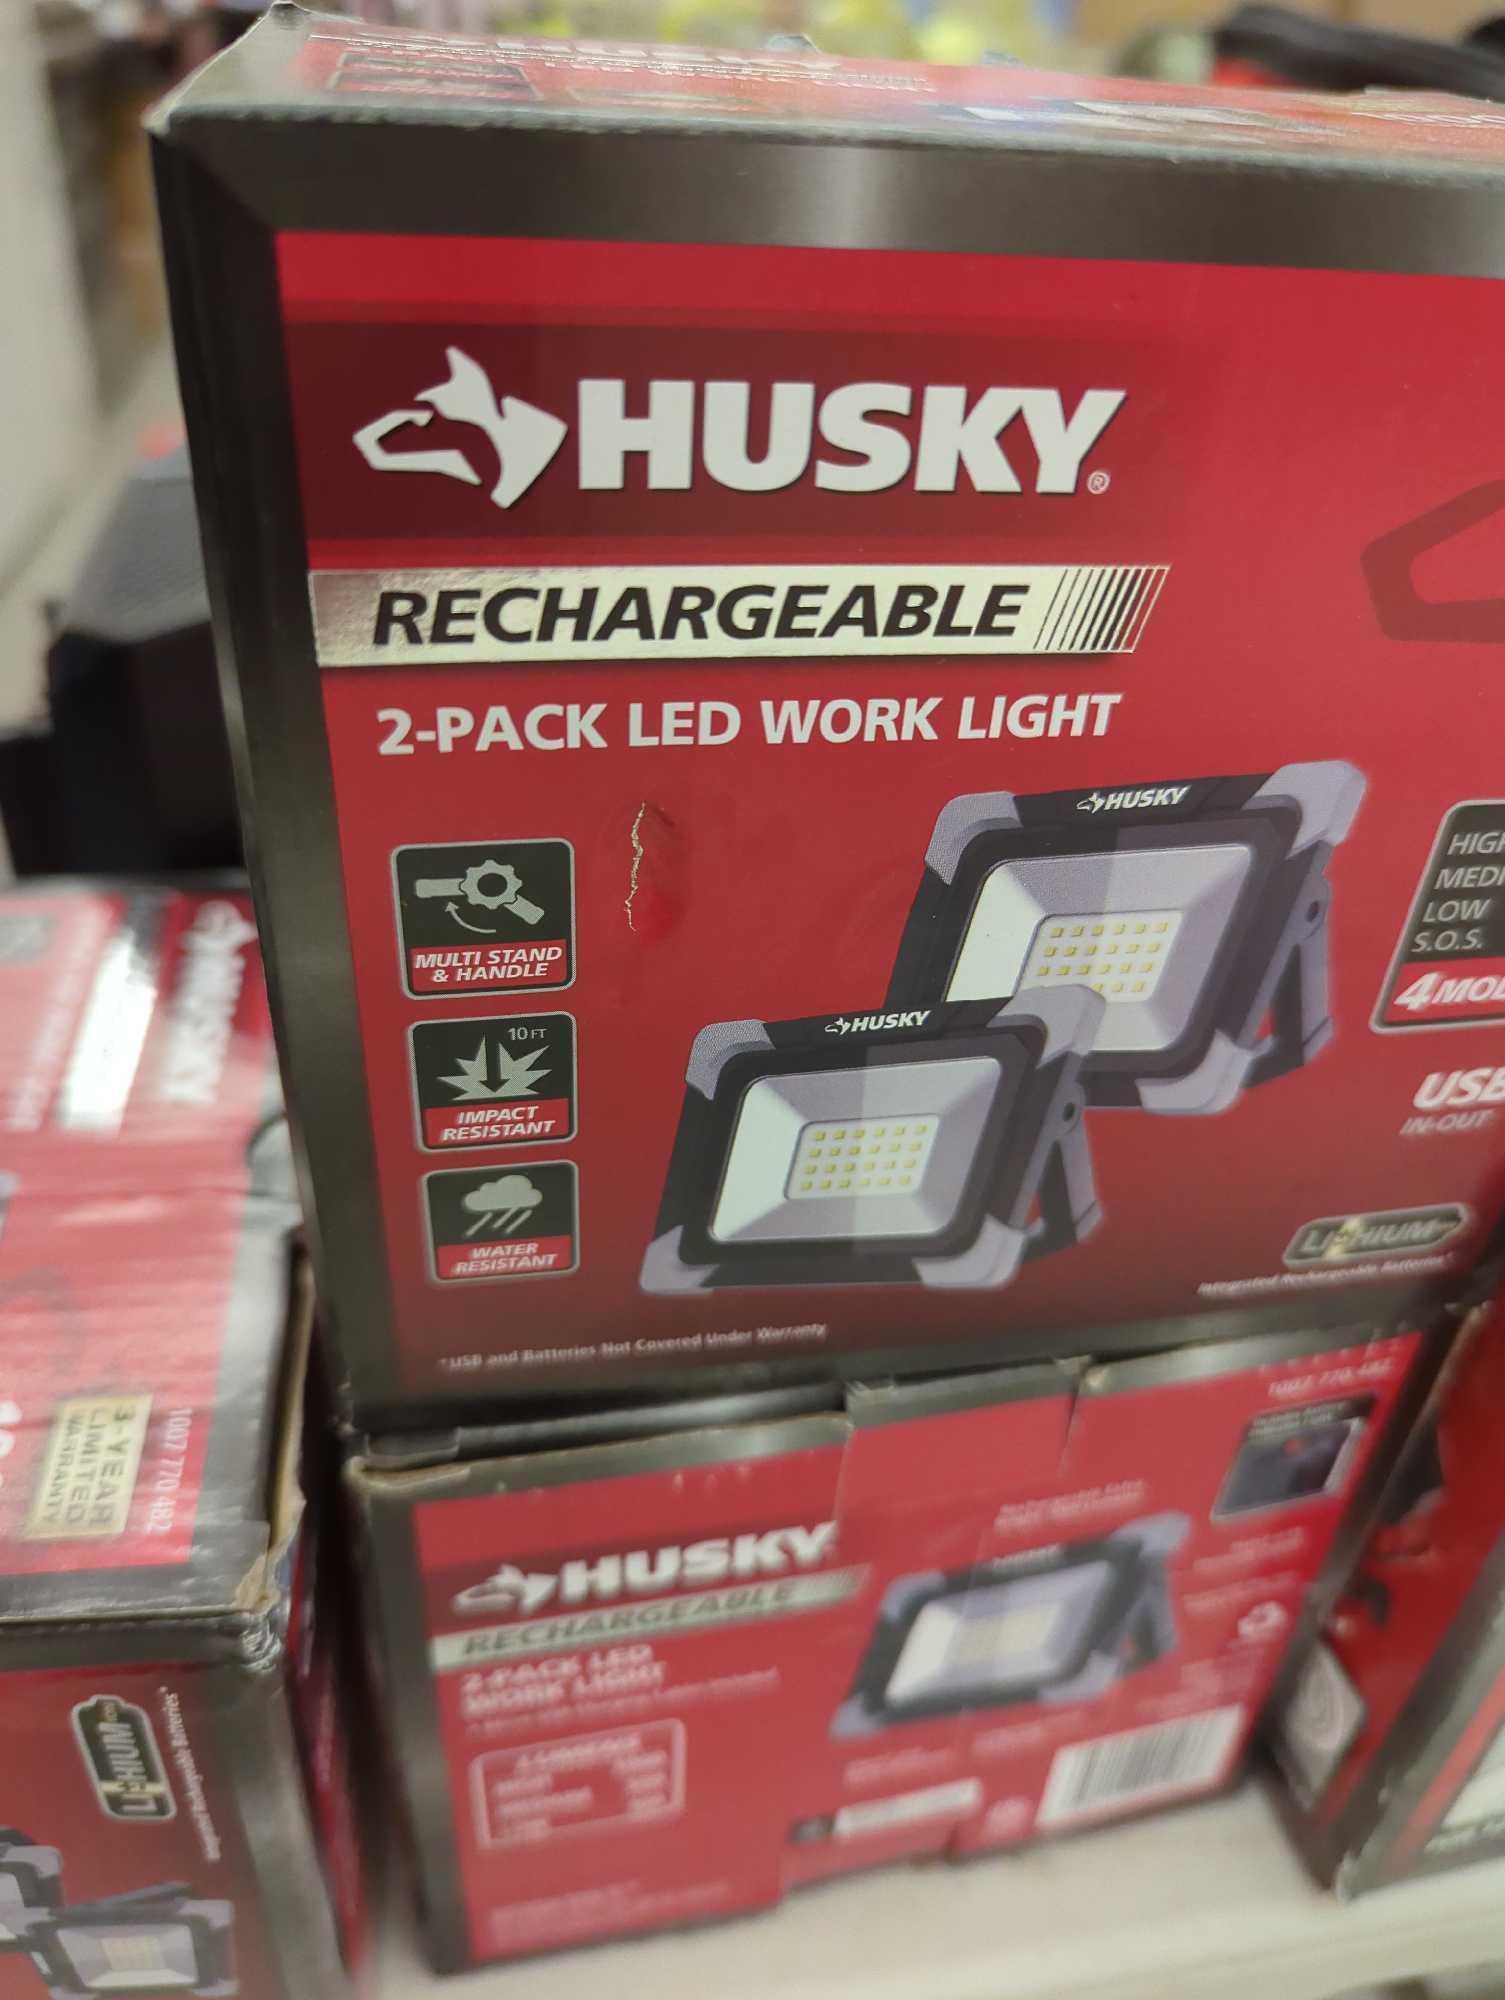 Lot of 3 Husky 1000 Lumen Rechargeable Work Light (2-Pack), Appears to be New in Factory Sealed Box